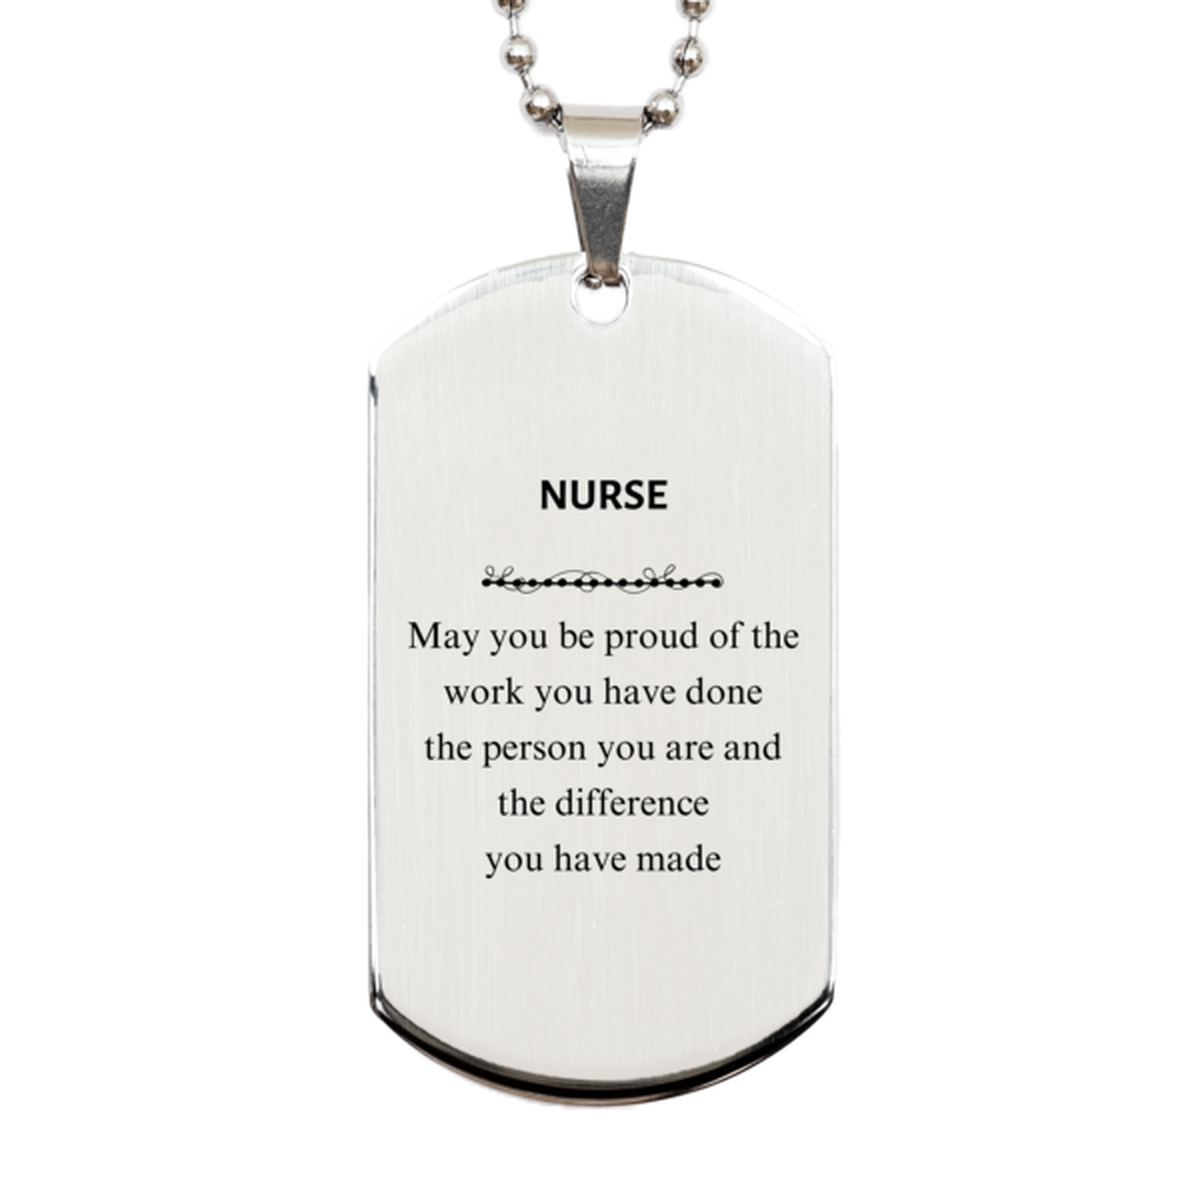 Nurse May you be proud of the work you have done, Retirement Nurse Silver Dog Tag for Colleague Appreciation Gifts Amazing for Nurse